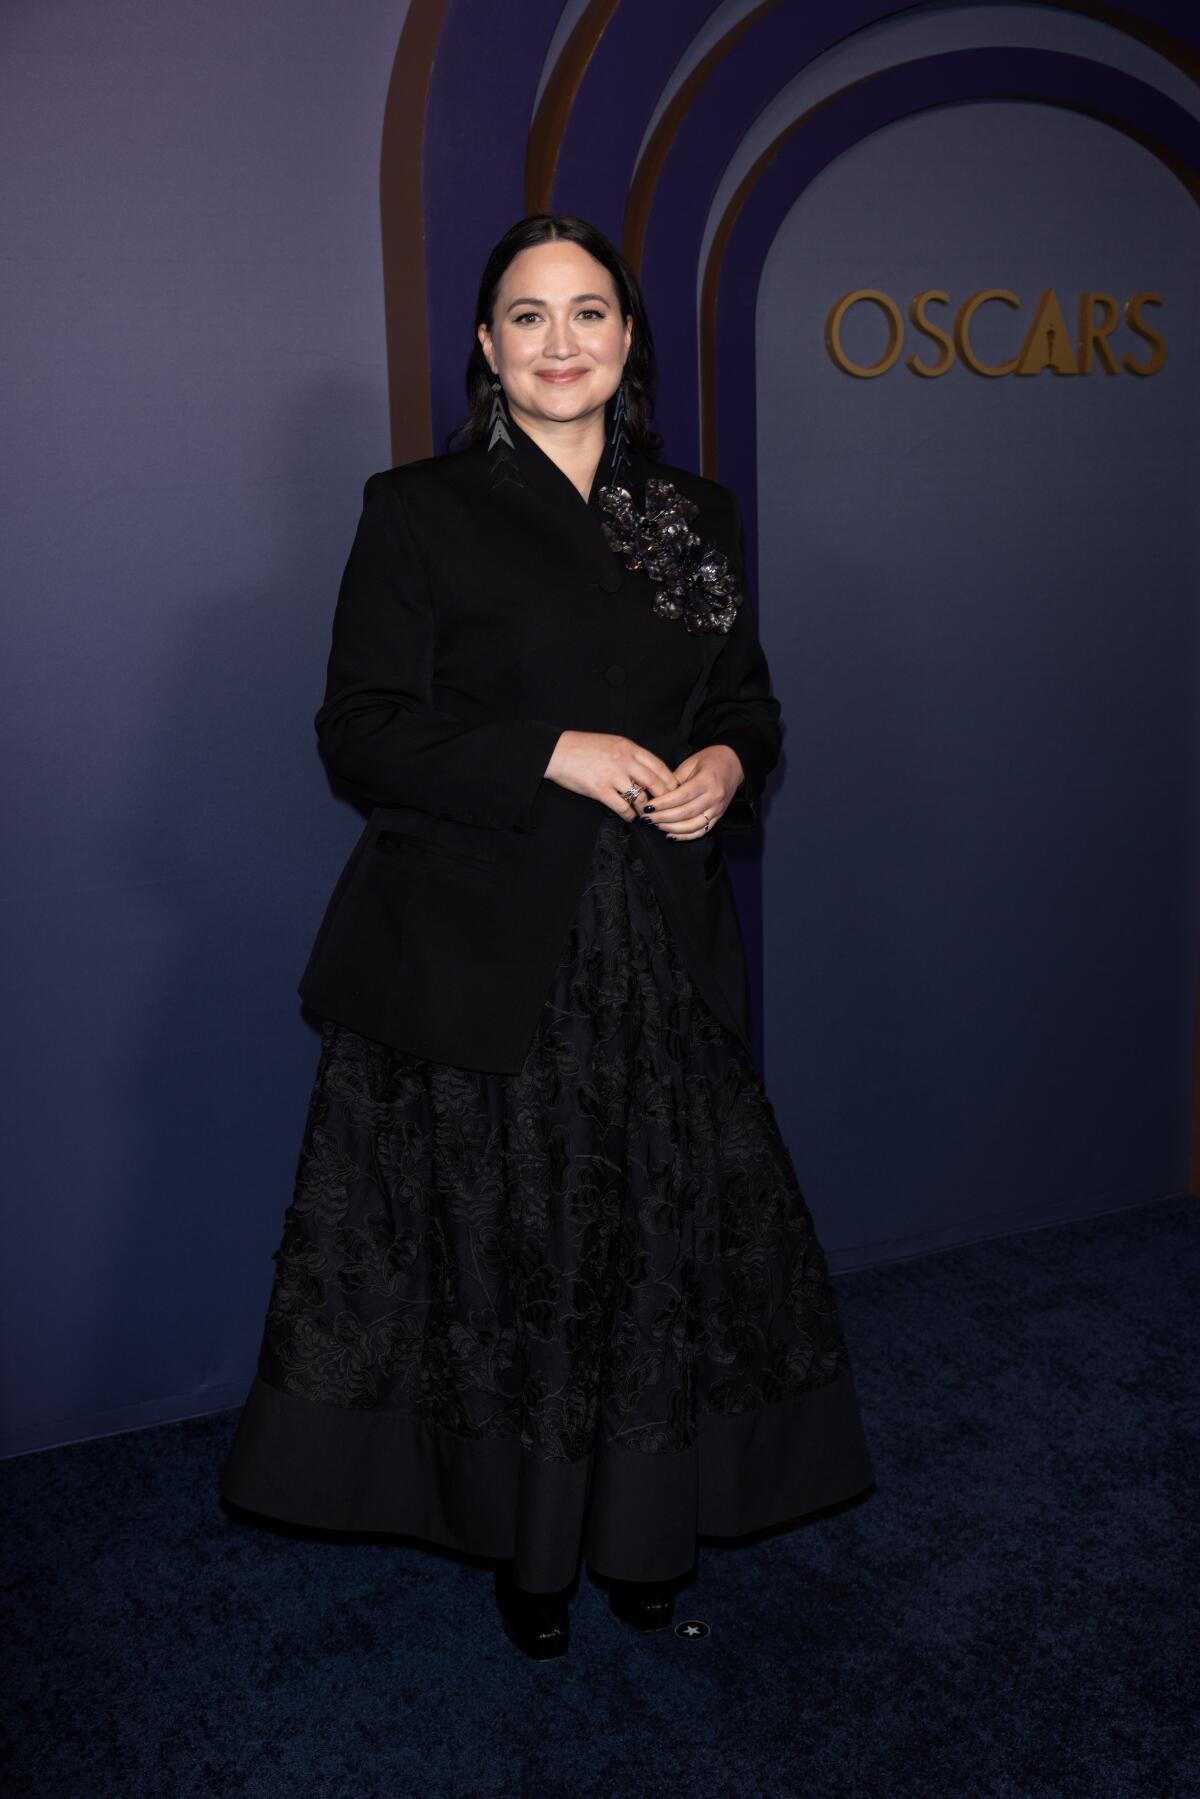 "Killers of the Flower Moon" actor Lily Gladstone was among the Oscar contenders in attendance at the Governors Awards.